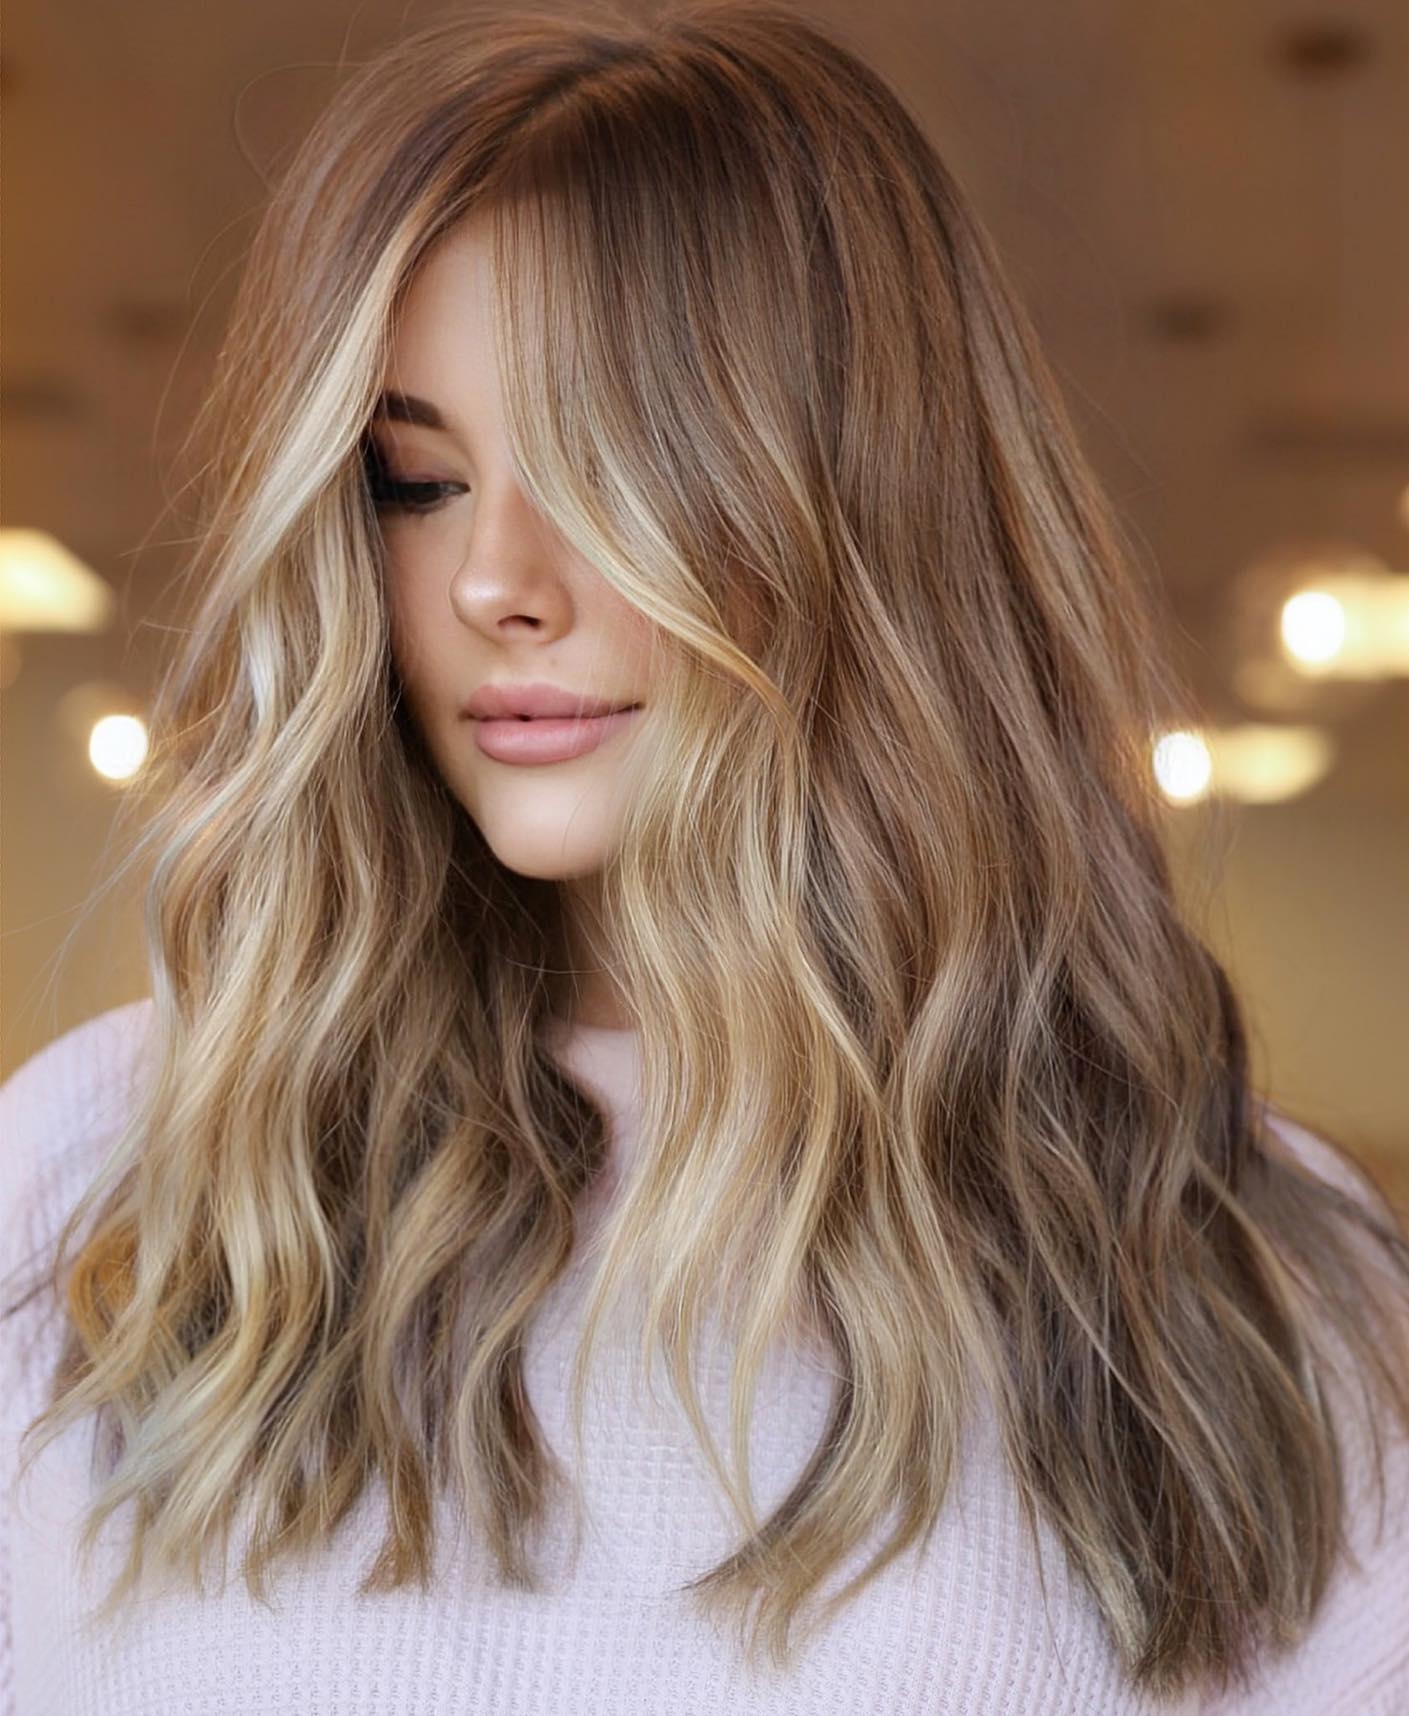 What are the best hairstyles for very thin hair? - Hair Adviser